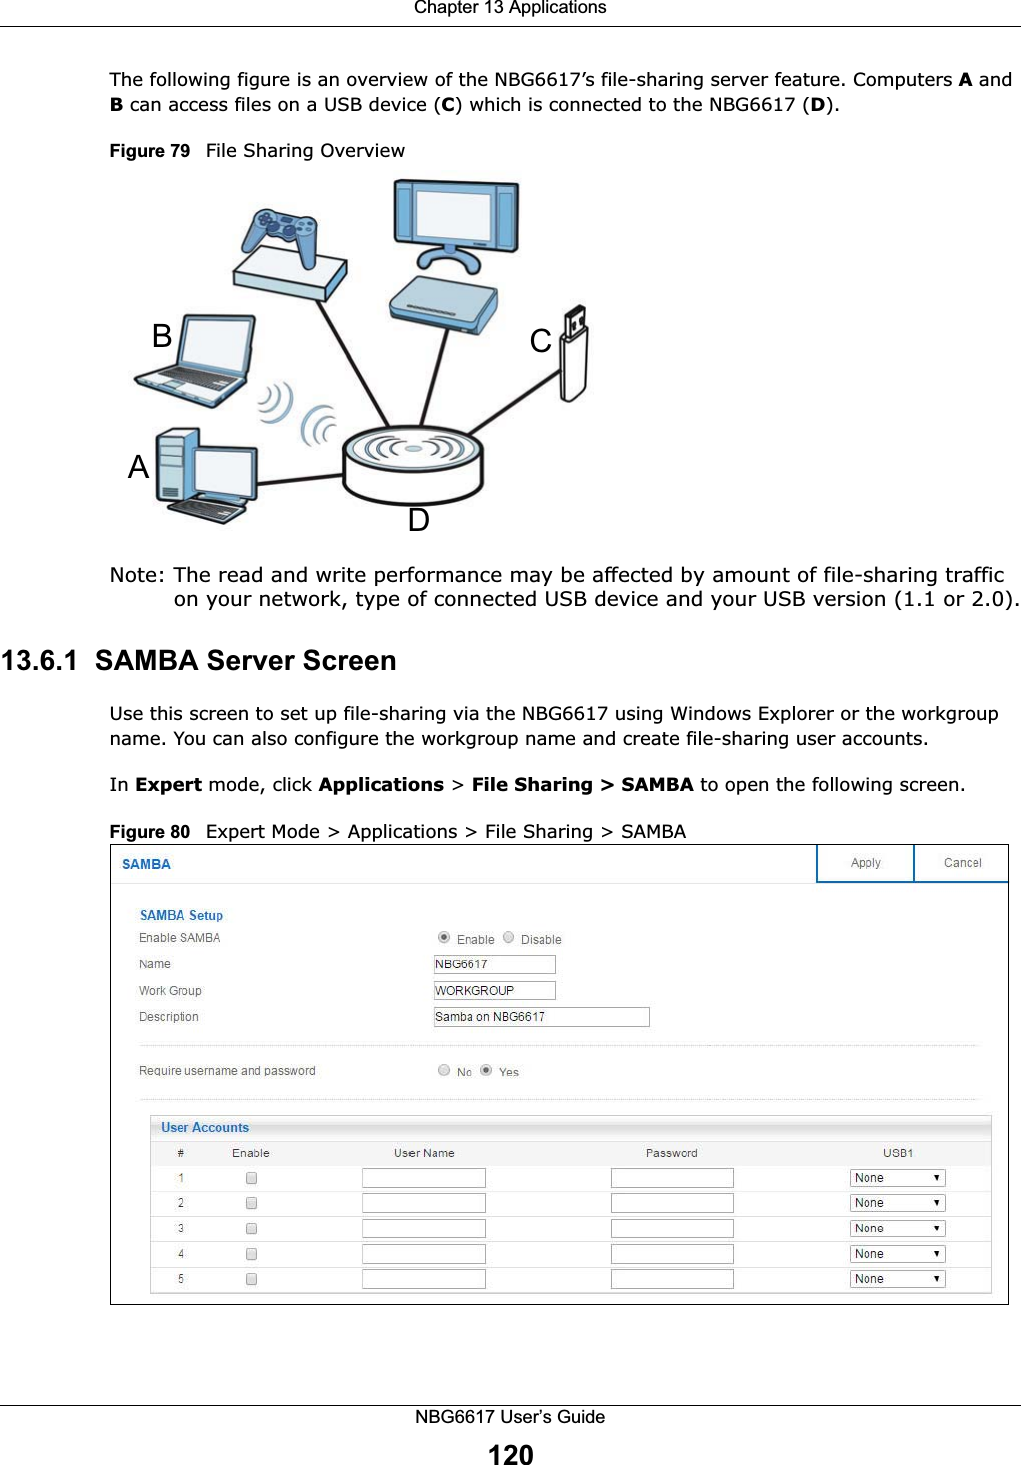 Chapter 13 ApplicationsNBG6617 User’s Guide120The following figure is an overview of the NBG6617’s file-sharing server feature. Computers A and B can access files on a USB device (C) which is connected to the NBG6617 (D).Figure 79   File Sharing OverviewNote: The read and write performance may be affected by amount of file-sharing traffic on your network, type of connected USB device and your USB version (1.1 or 2.0).13.6.1  SAMBA Server ScreenUse this screen to set up file-sharing via the NBG6617 using Windows Explorer or the workgroup name. You can also configure the workgroup name and create file-sharing user accounts. In Expert mode, click Applications &gt; File Sharing &gt; SAMBA to open the following screen.Figure 80   Expert Mode &gt; Applications &gt; File Sharing &gt; SAMBA  ABCD